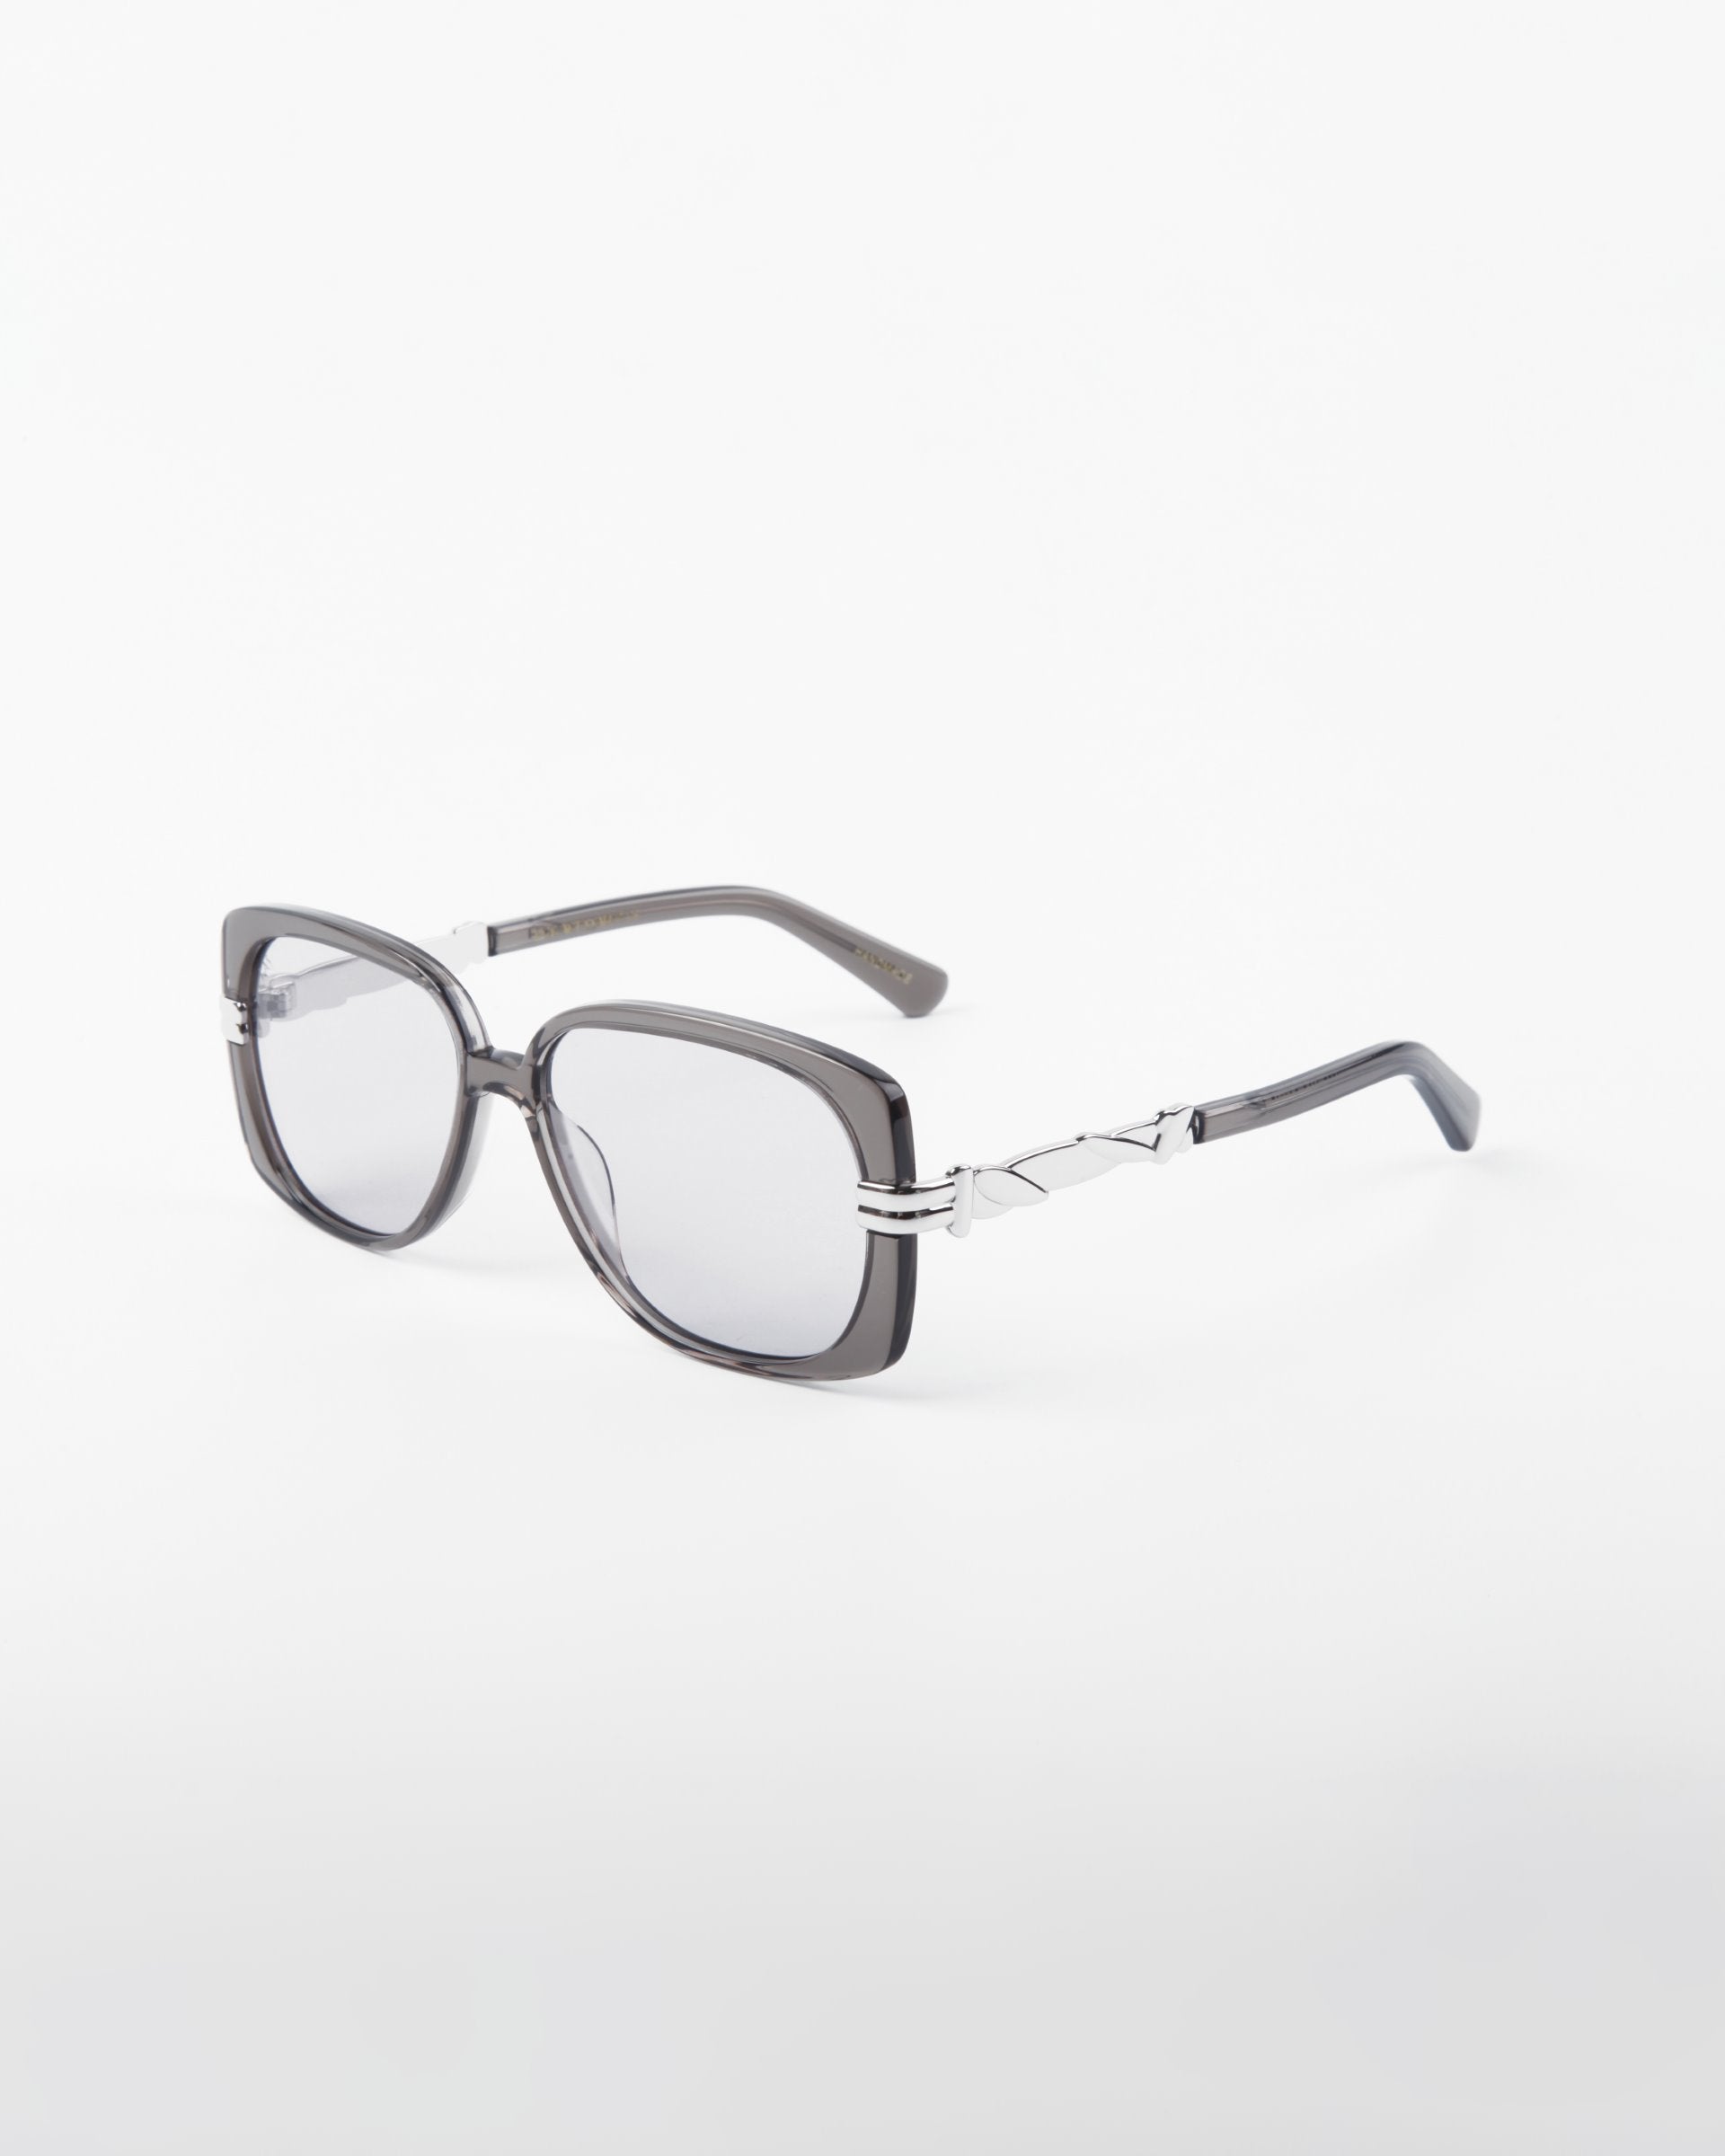 A pair of For Art's Sake® Icon rectangular sunglasses with silver metal frames and dark grey shatter-resistant nylon lenses lies on a white background. The UVA & UVB-protected temples are adorned with geometric cut-out designs, adding a modern touch to the glasses.